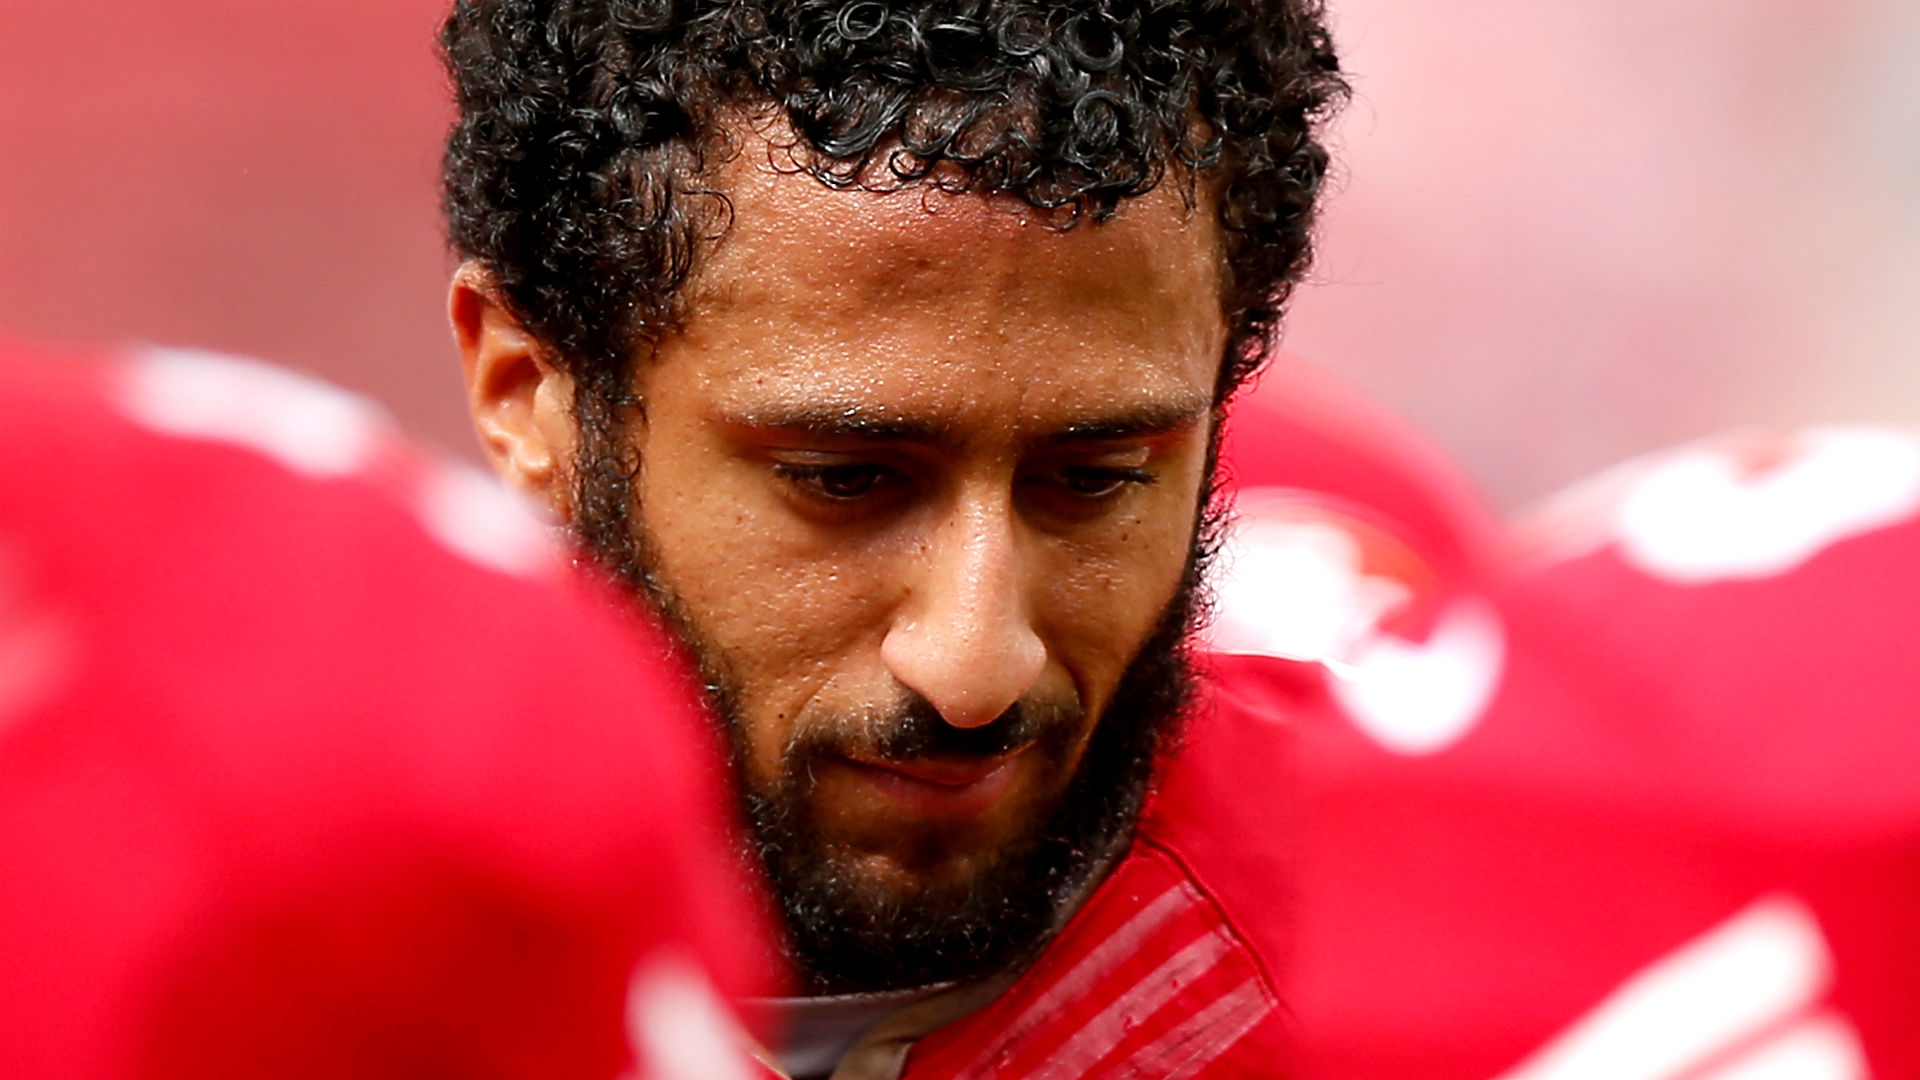 Did The Star-Spangled Banner That Kaepernick Is Protesting Promote Slavery?